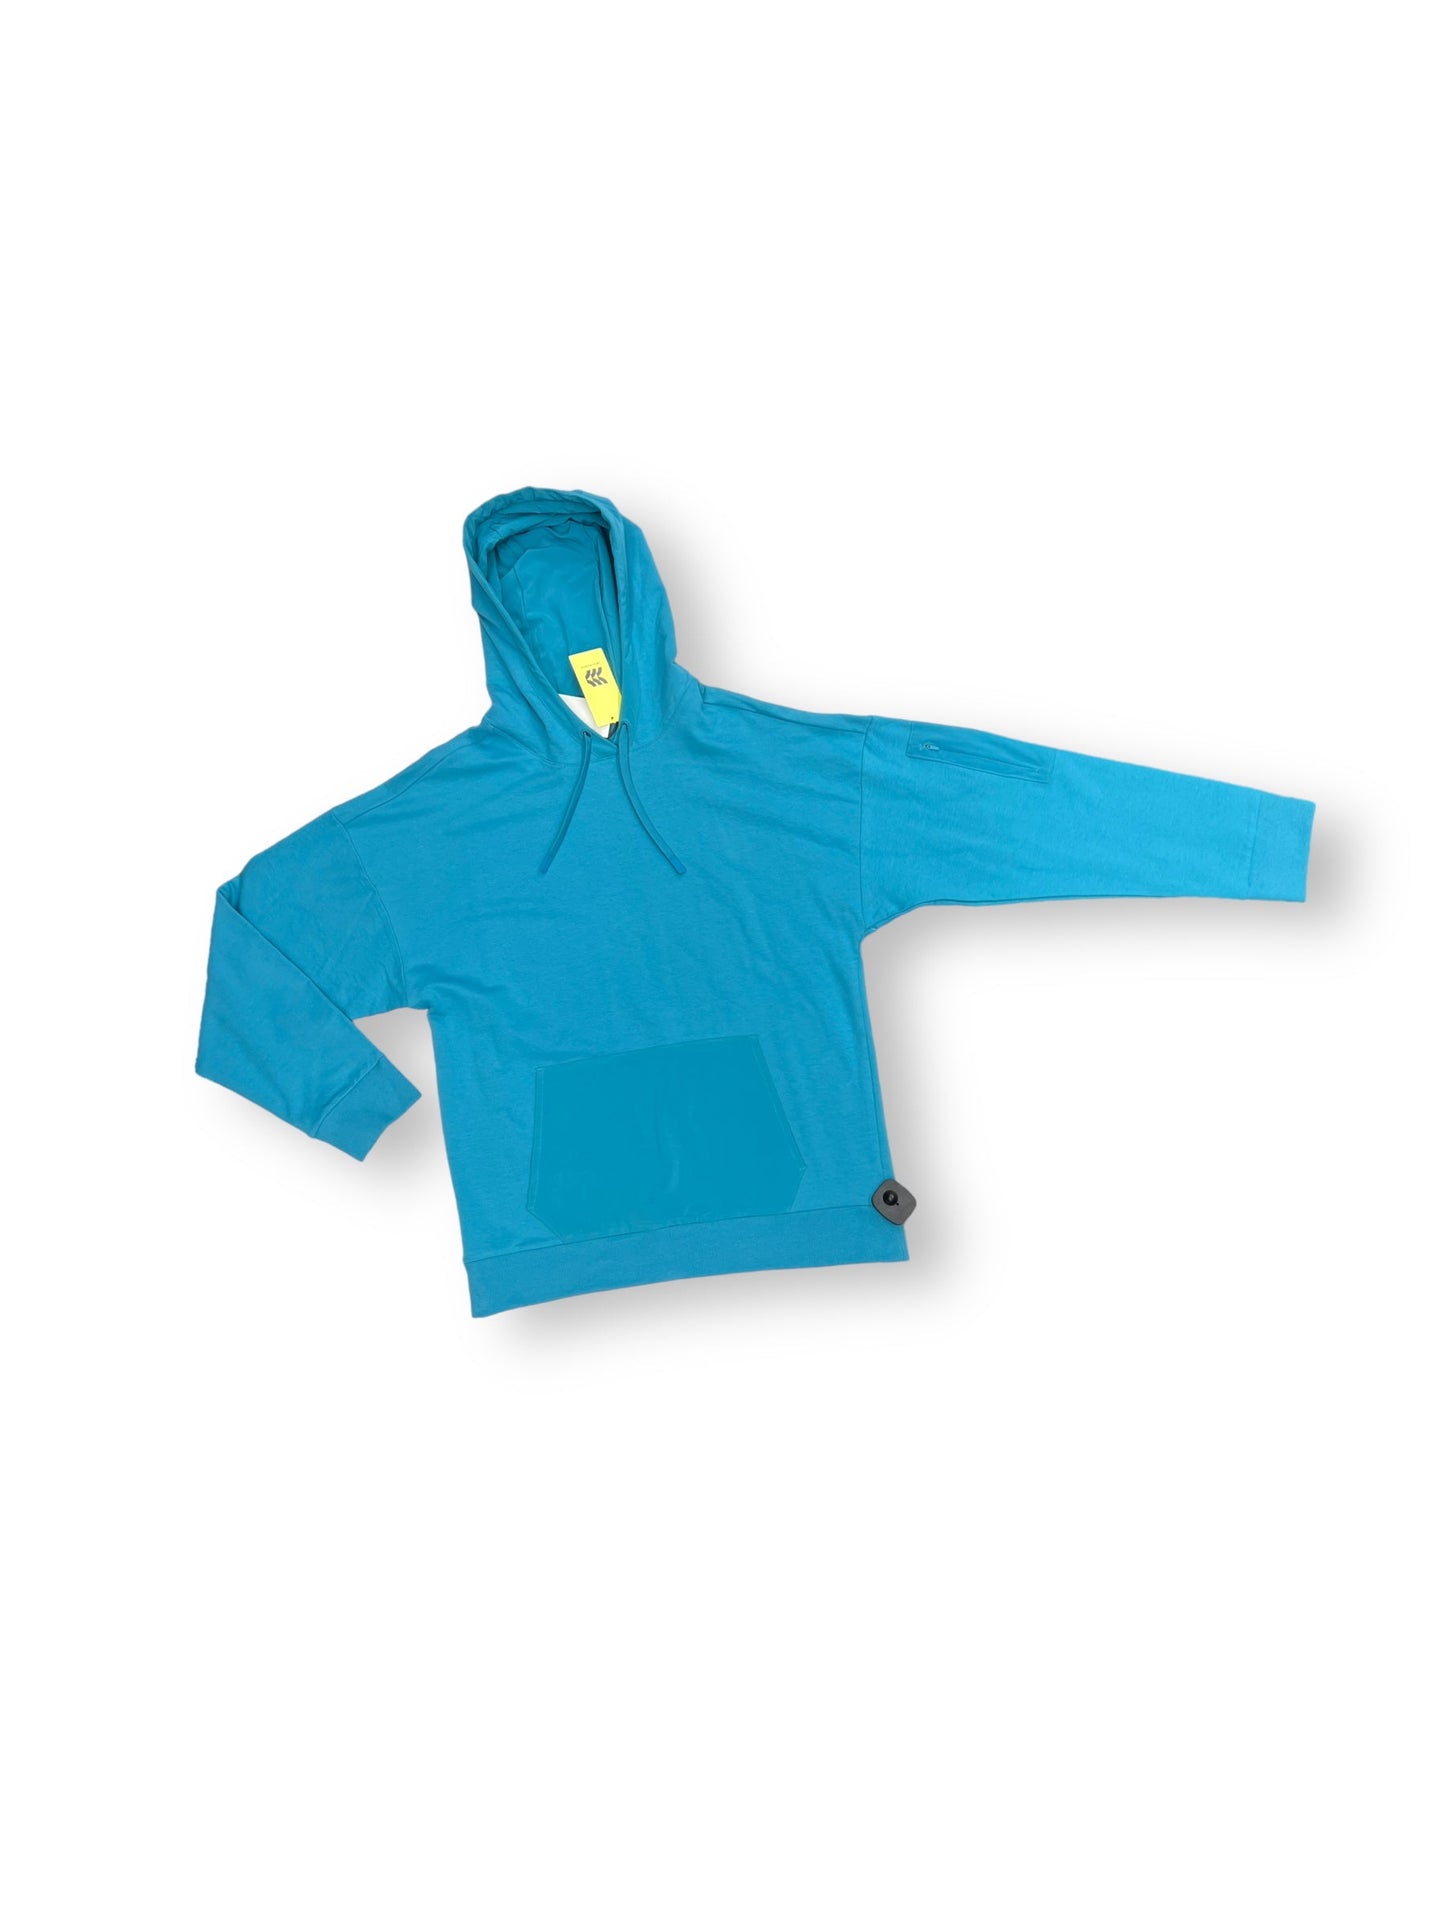 Athletic Sweatshirt Hoodie By All In Motion Size: Xs